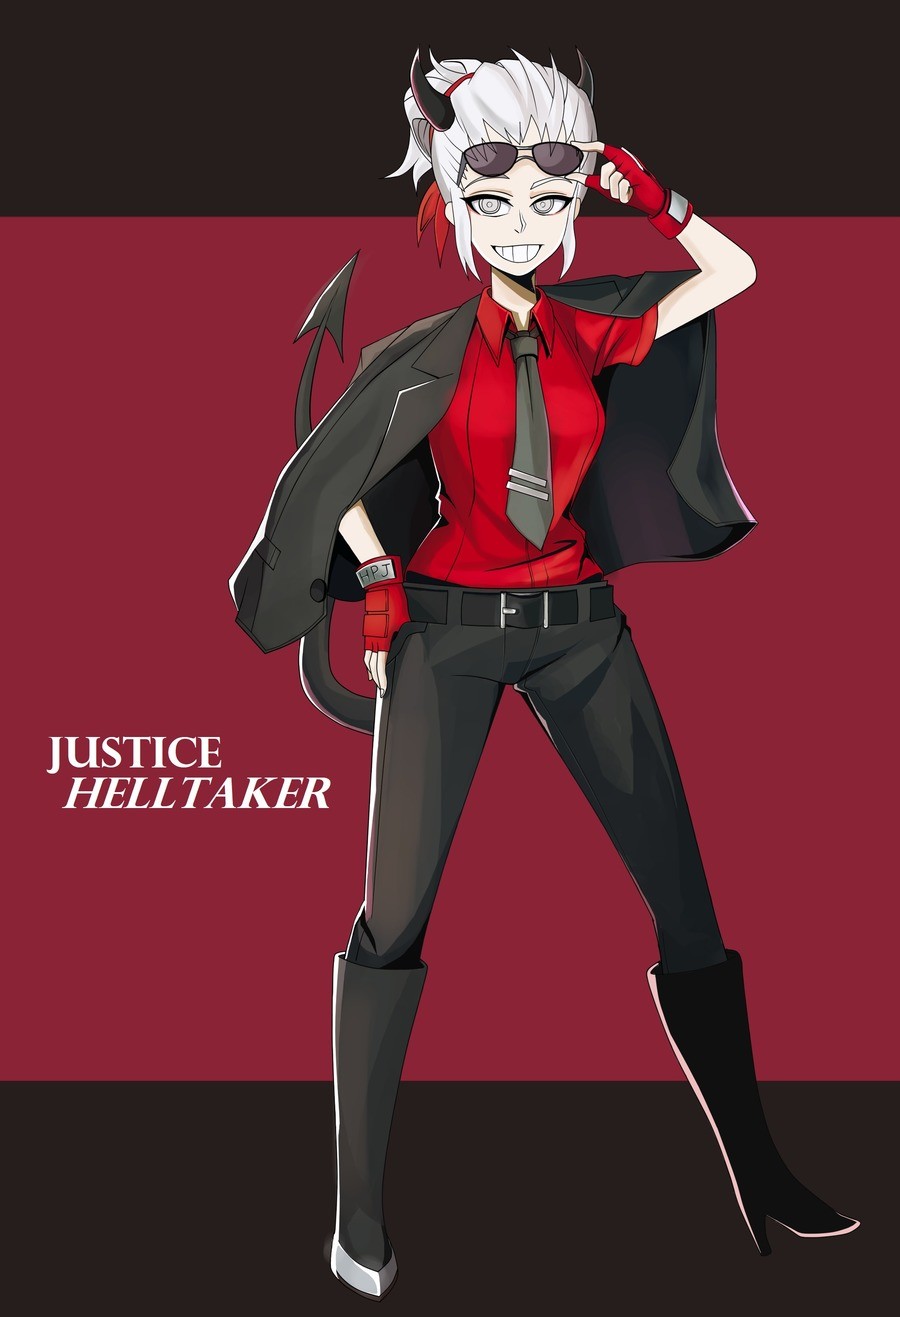 Daily Demon Harem 235: Justice!. Hope you've all been having an awesome week! Source: join list: DailyDemonHarem (194 subs)Mention Clicks: 38148Msgs Sent: 50296